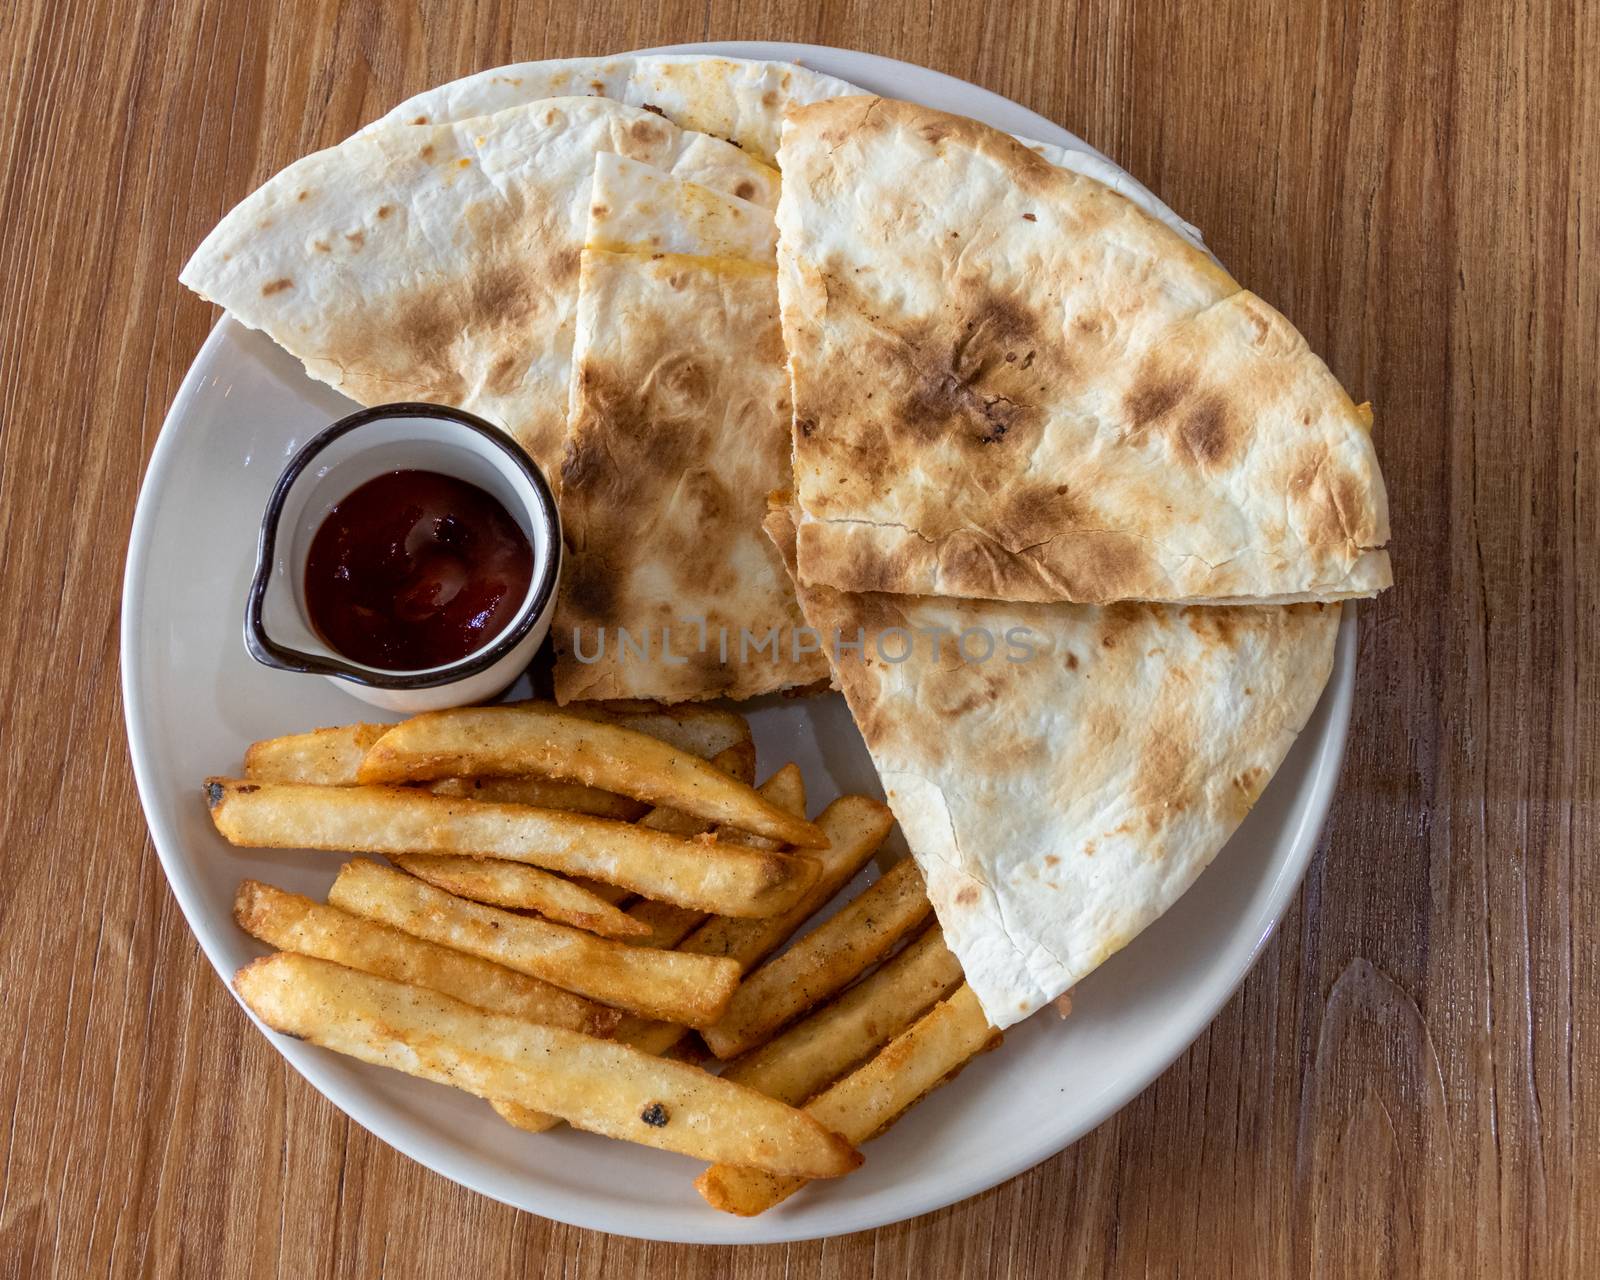 Quesadilla and french fries on plate, shot from above